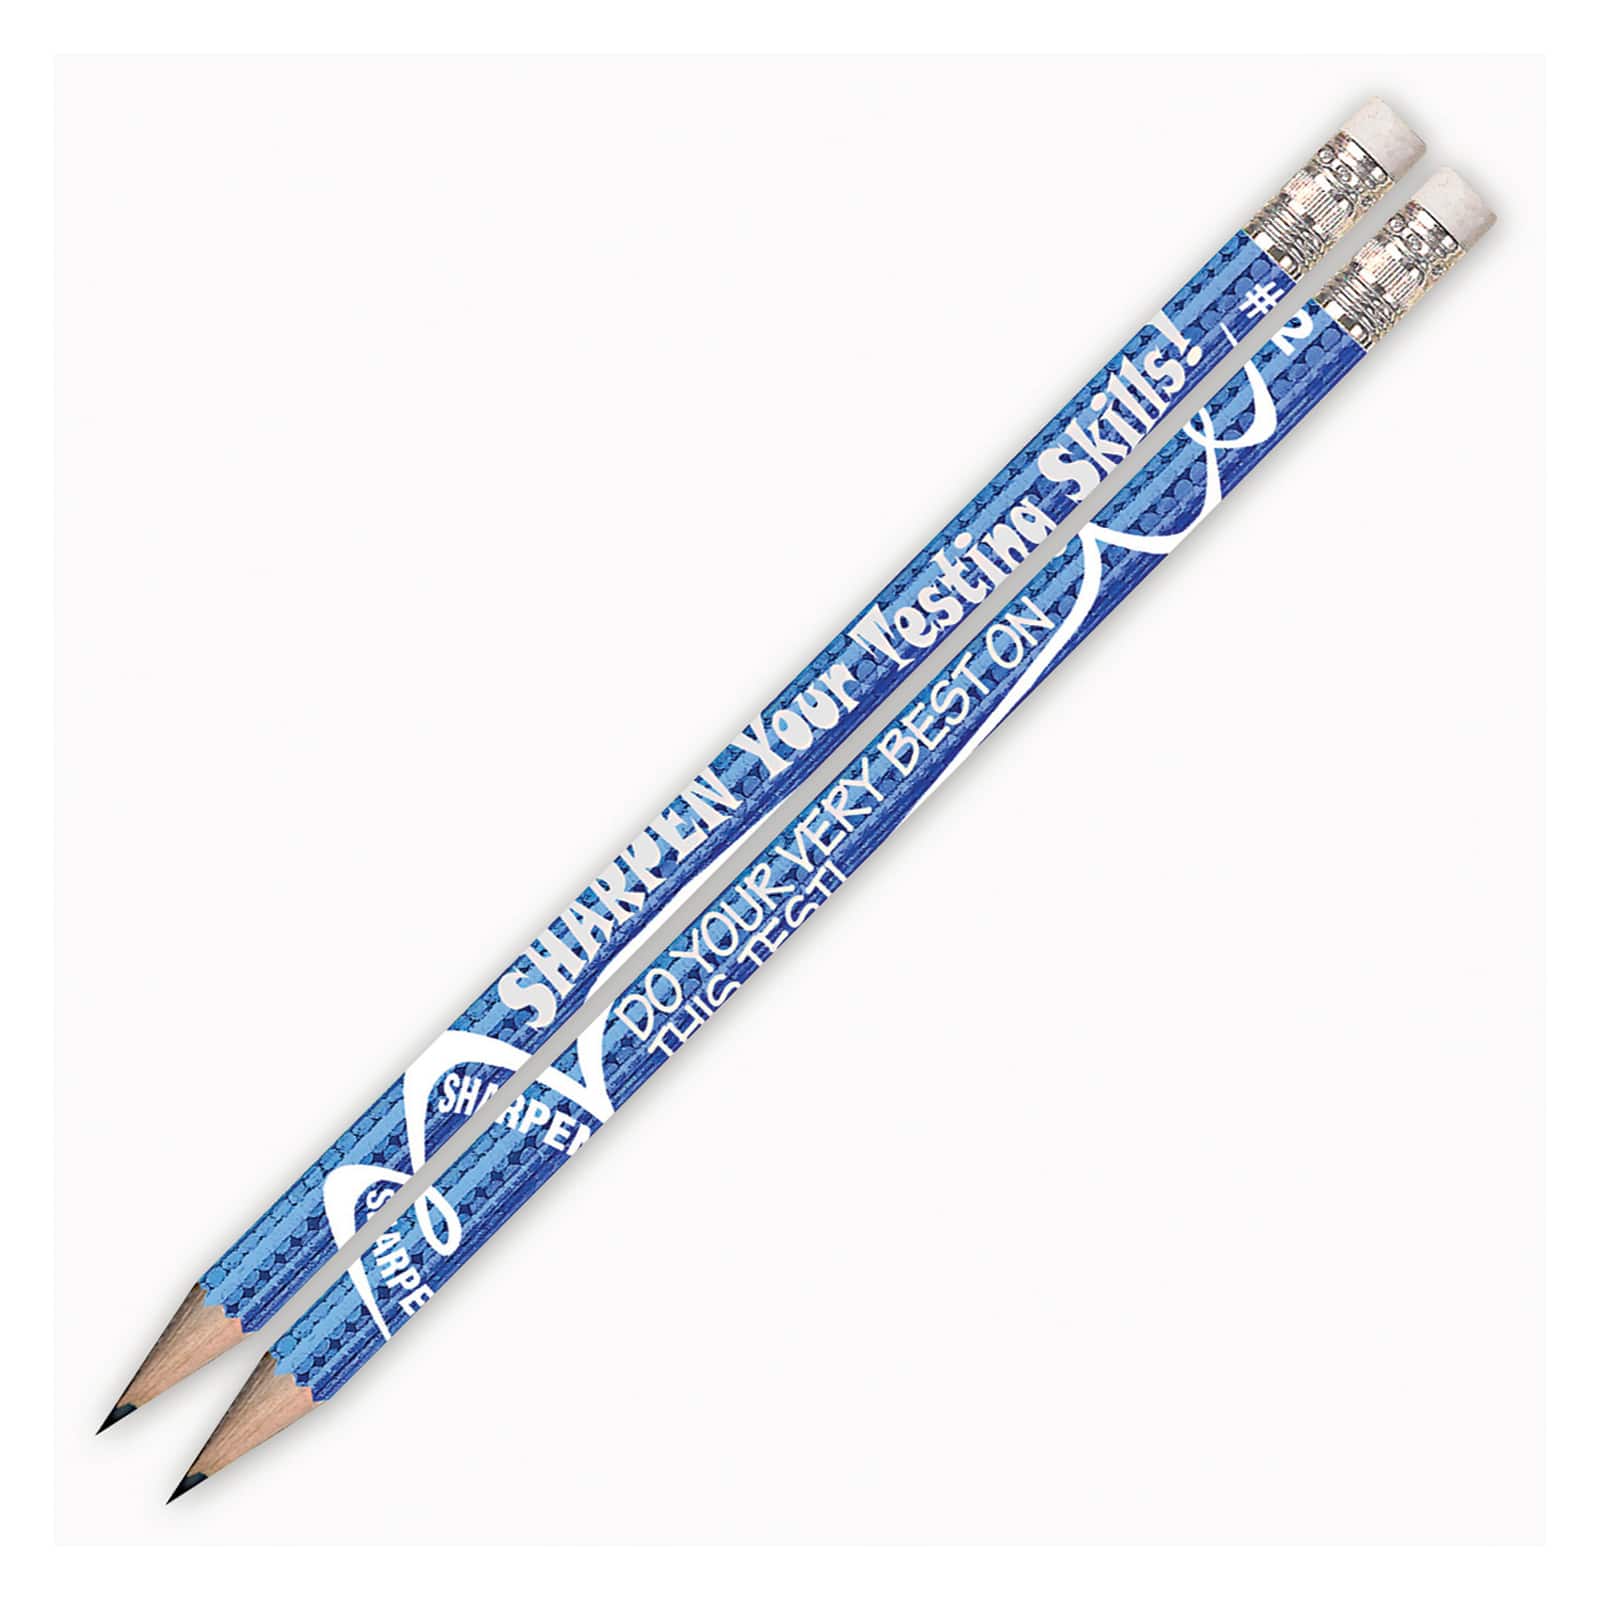 Musgrave Pencil Company Sharpen Your Testing Skills Motivational Pencil, 12ct.